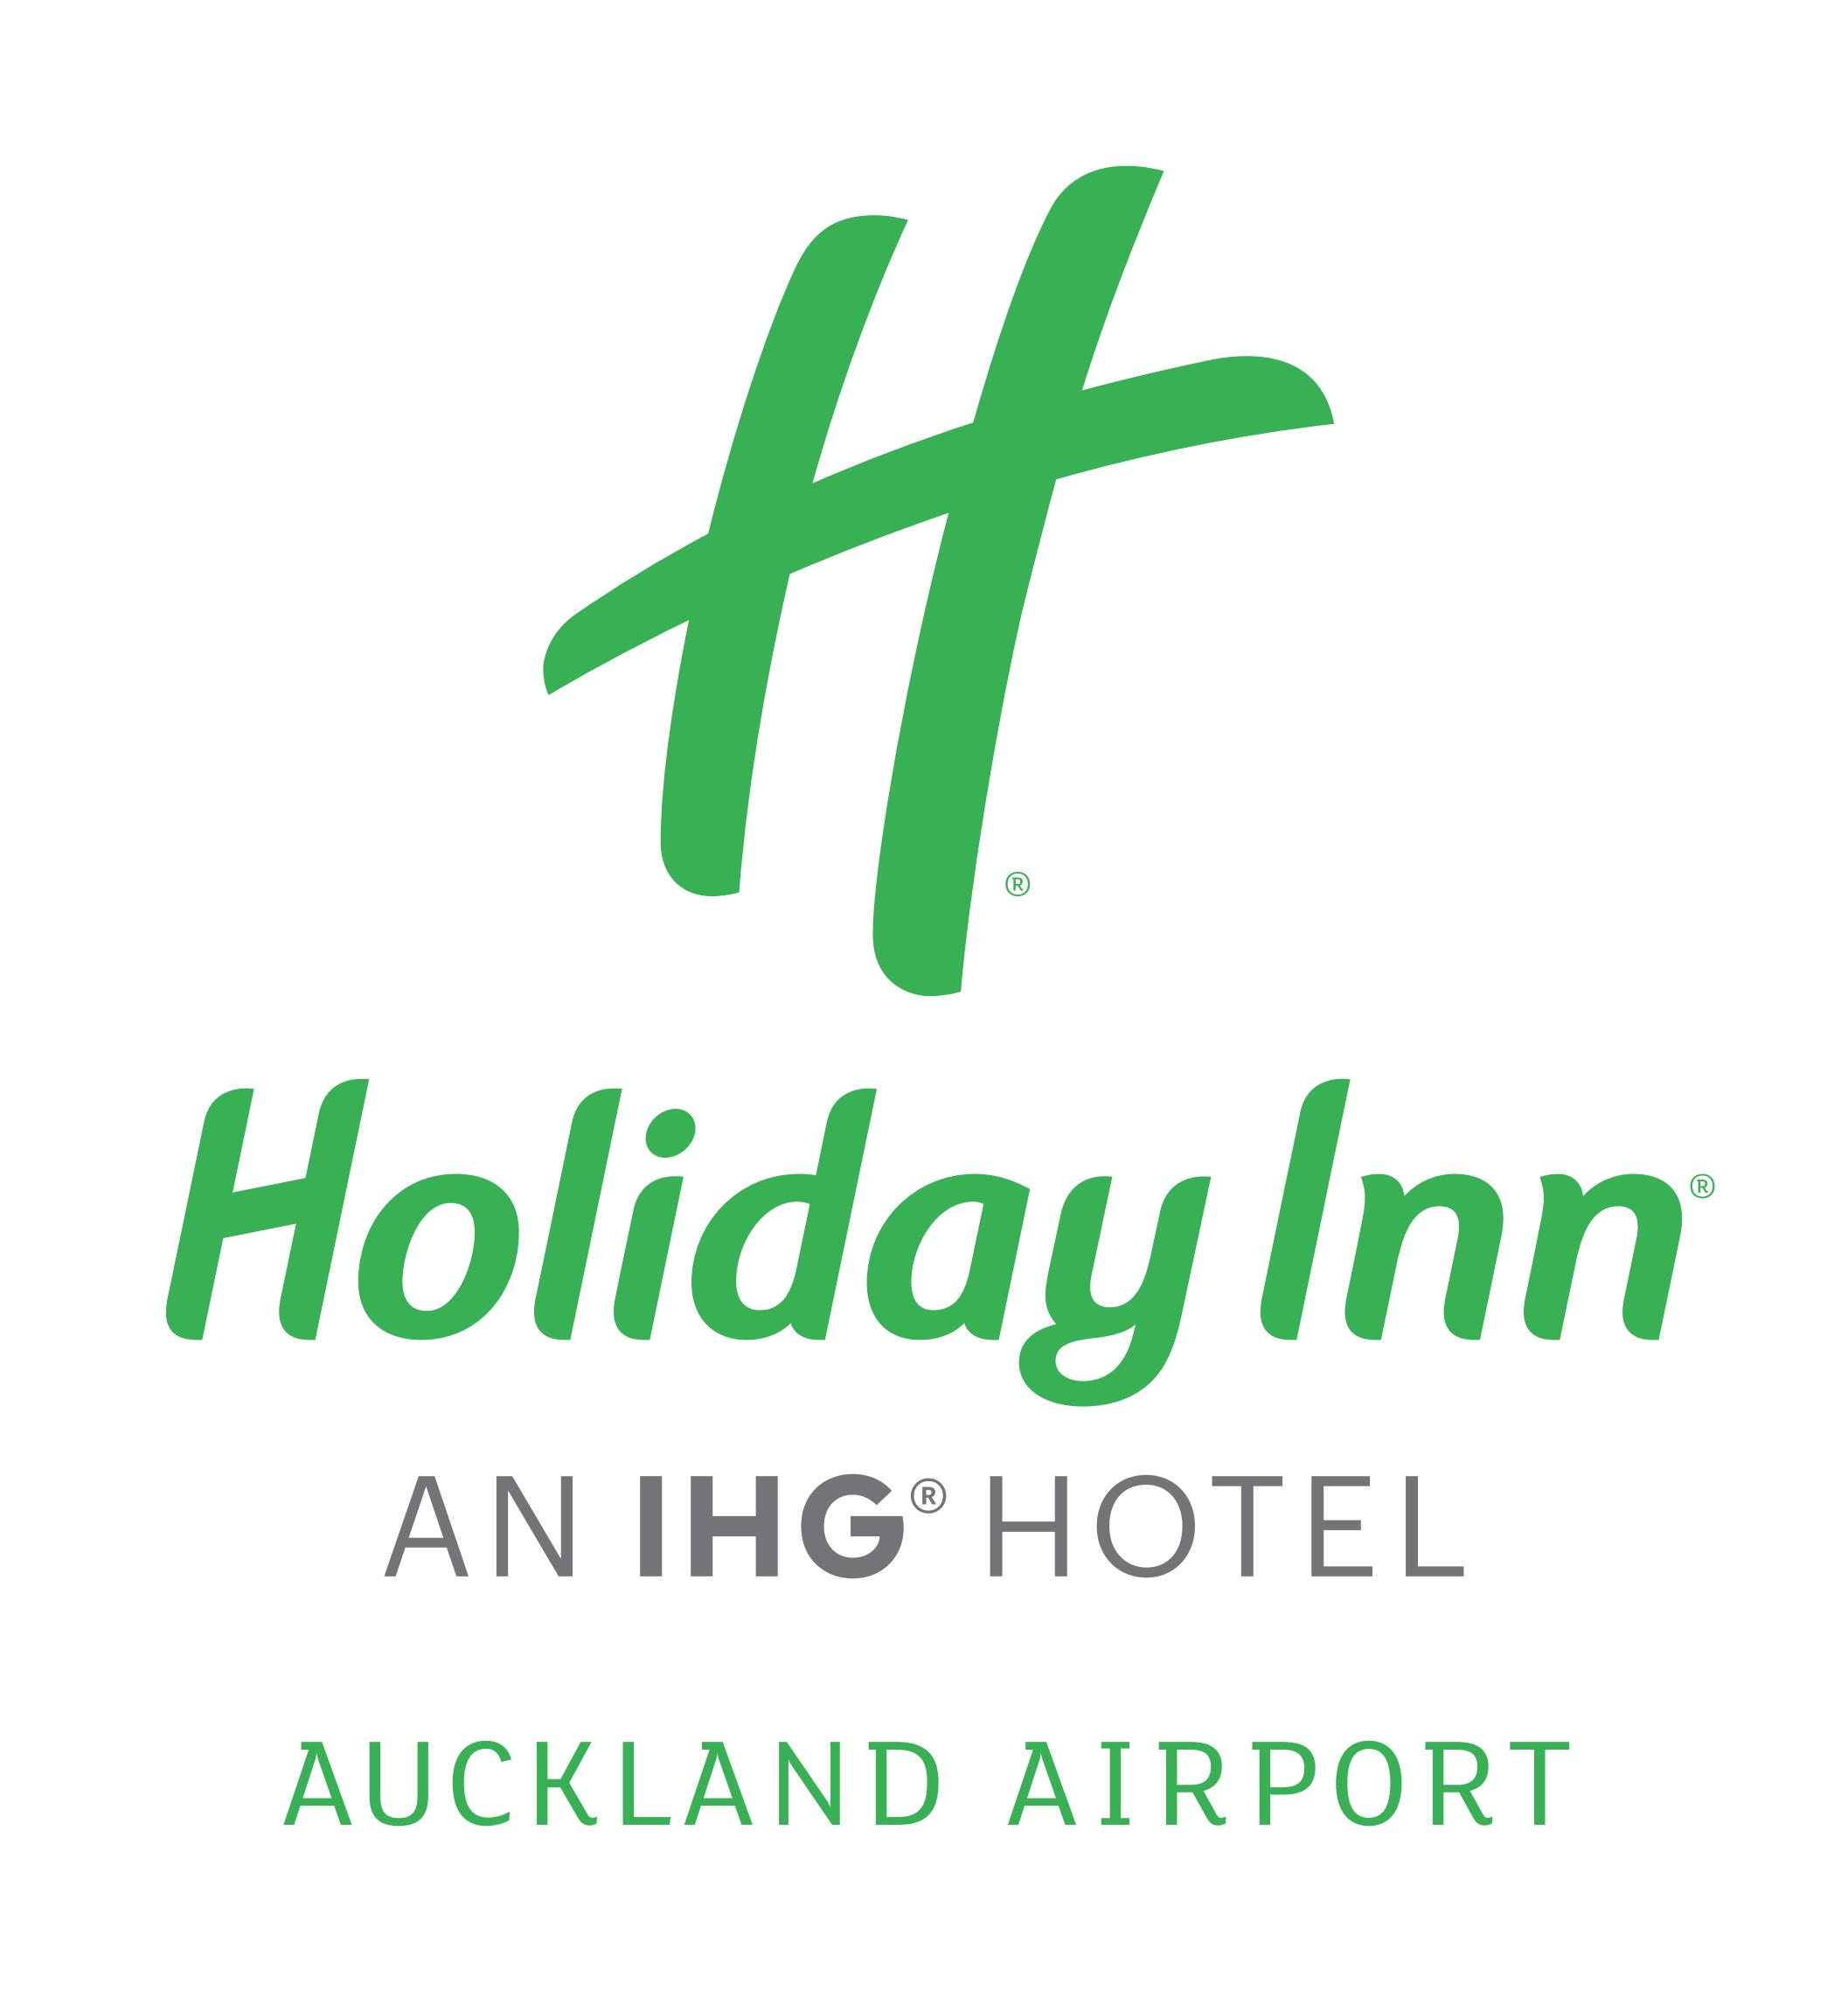 Holiday Inn Auckland Airport - Managed-isolation facility for government (updated 20 July 2020)